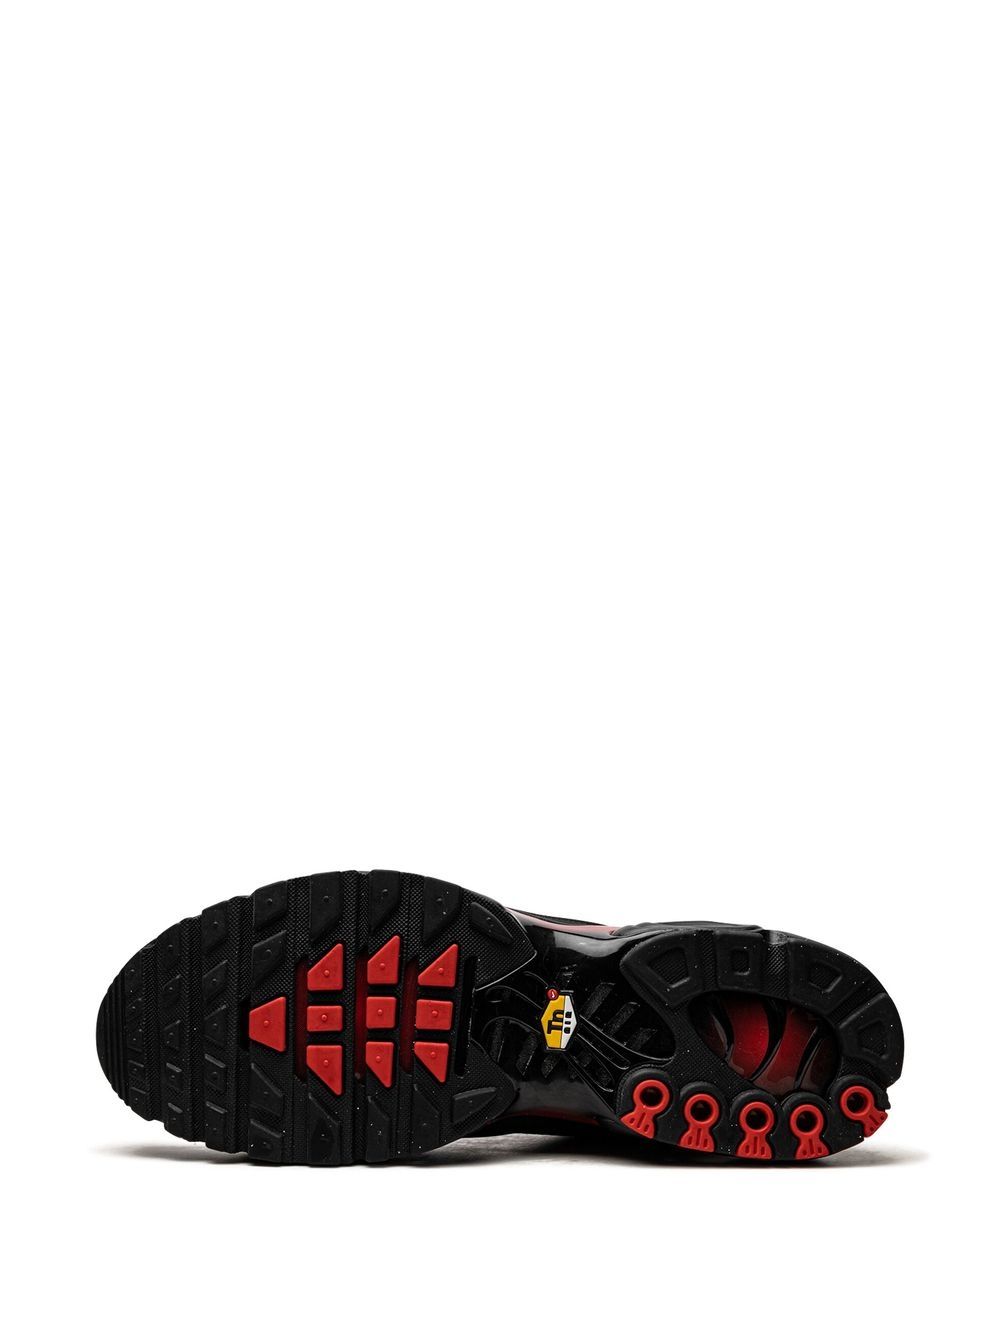 Shop Nike Air Max Plus "bred Reflective" Sneakers In Blue